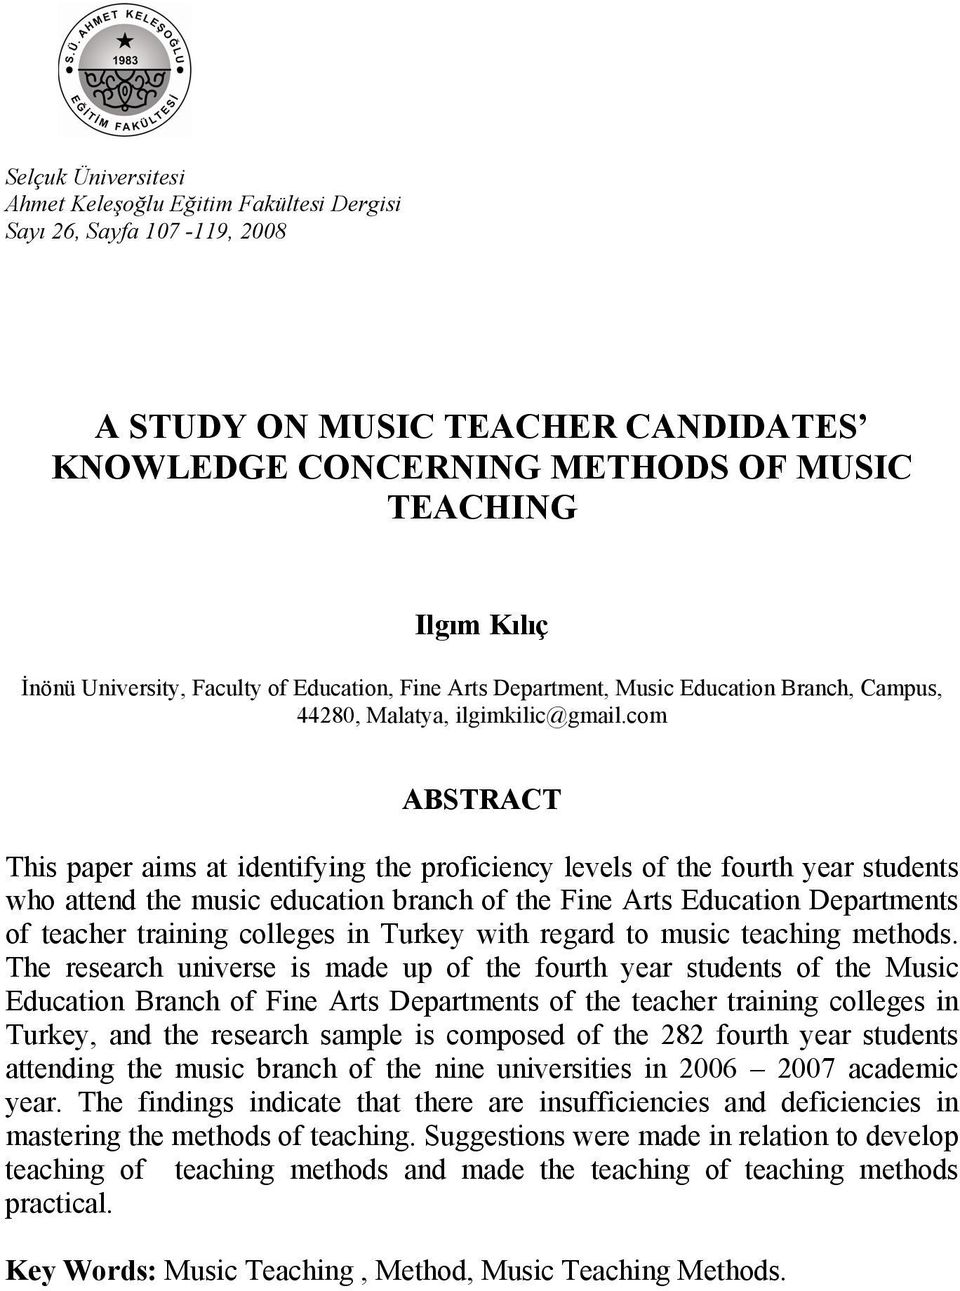 com ABSTRACT This paper aims at identifying the proficiency levels of the fourth year students who attend the music education branch of the Fine Arts Education Departments of teacher training